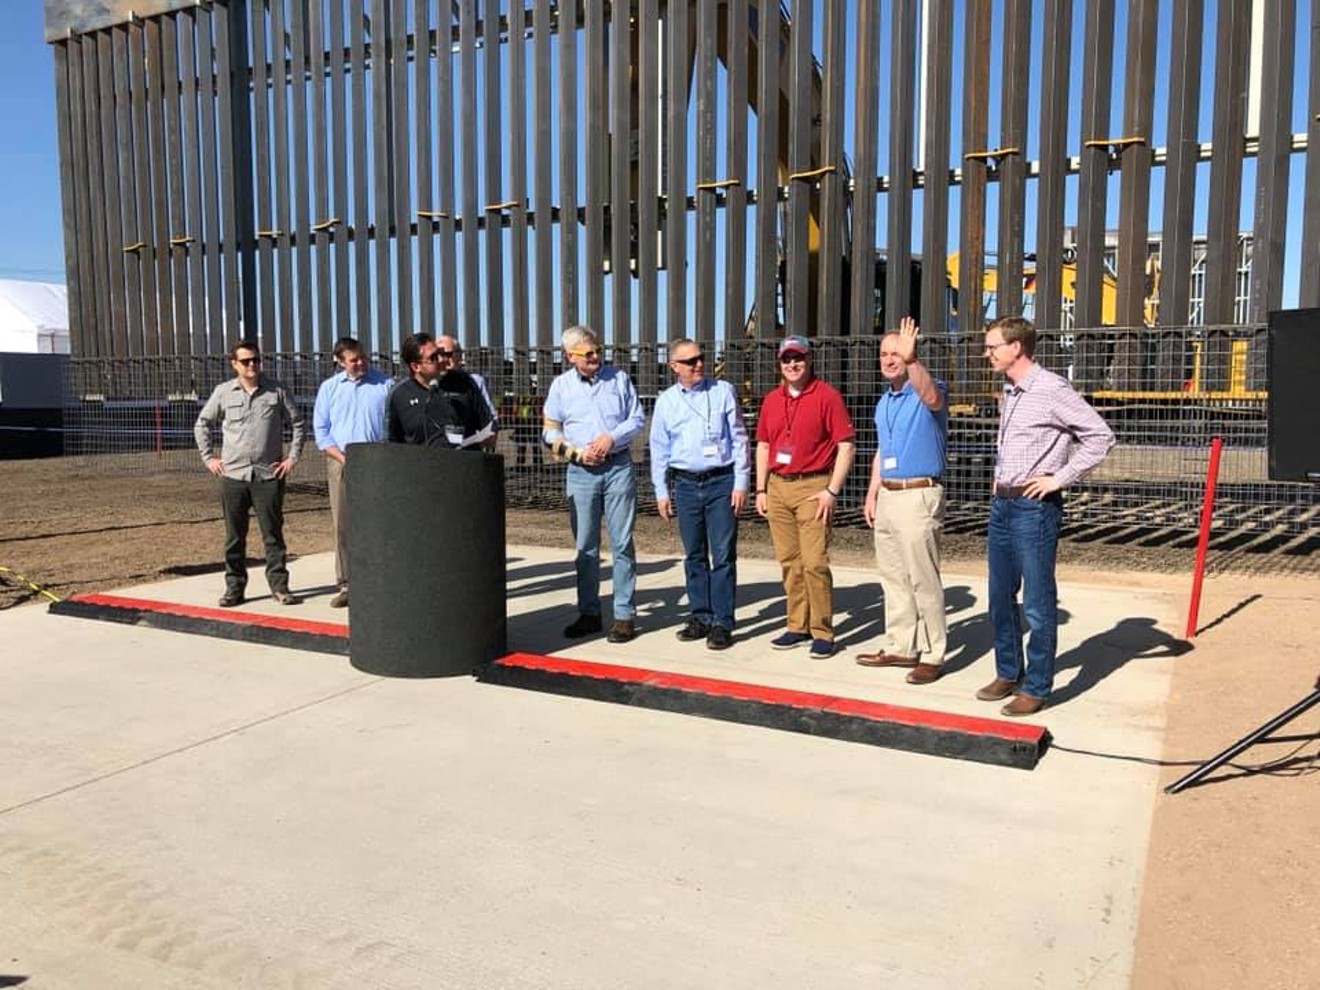 Several congressmen pose for a photo during a trip to Arizona to see the "crisis" on the U.S.-Mexico border.